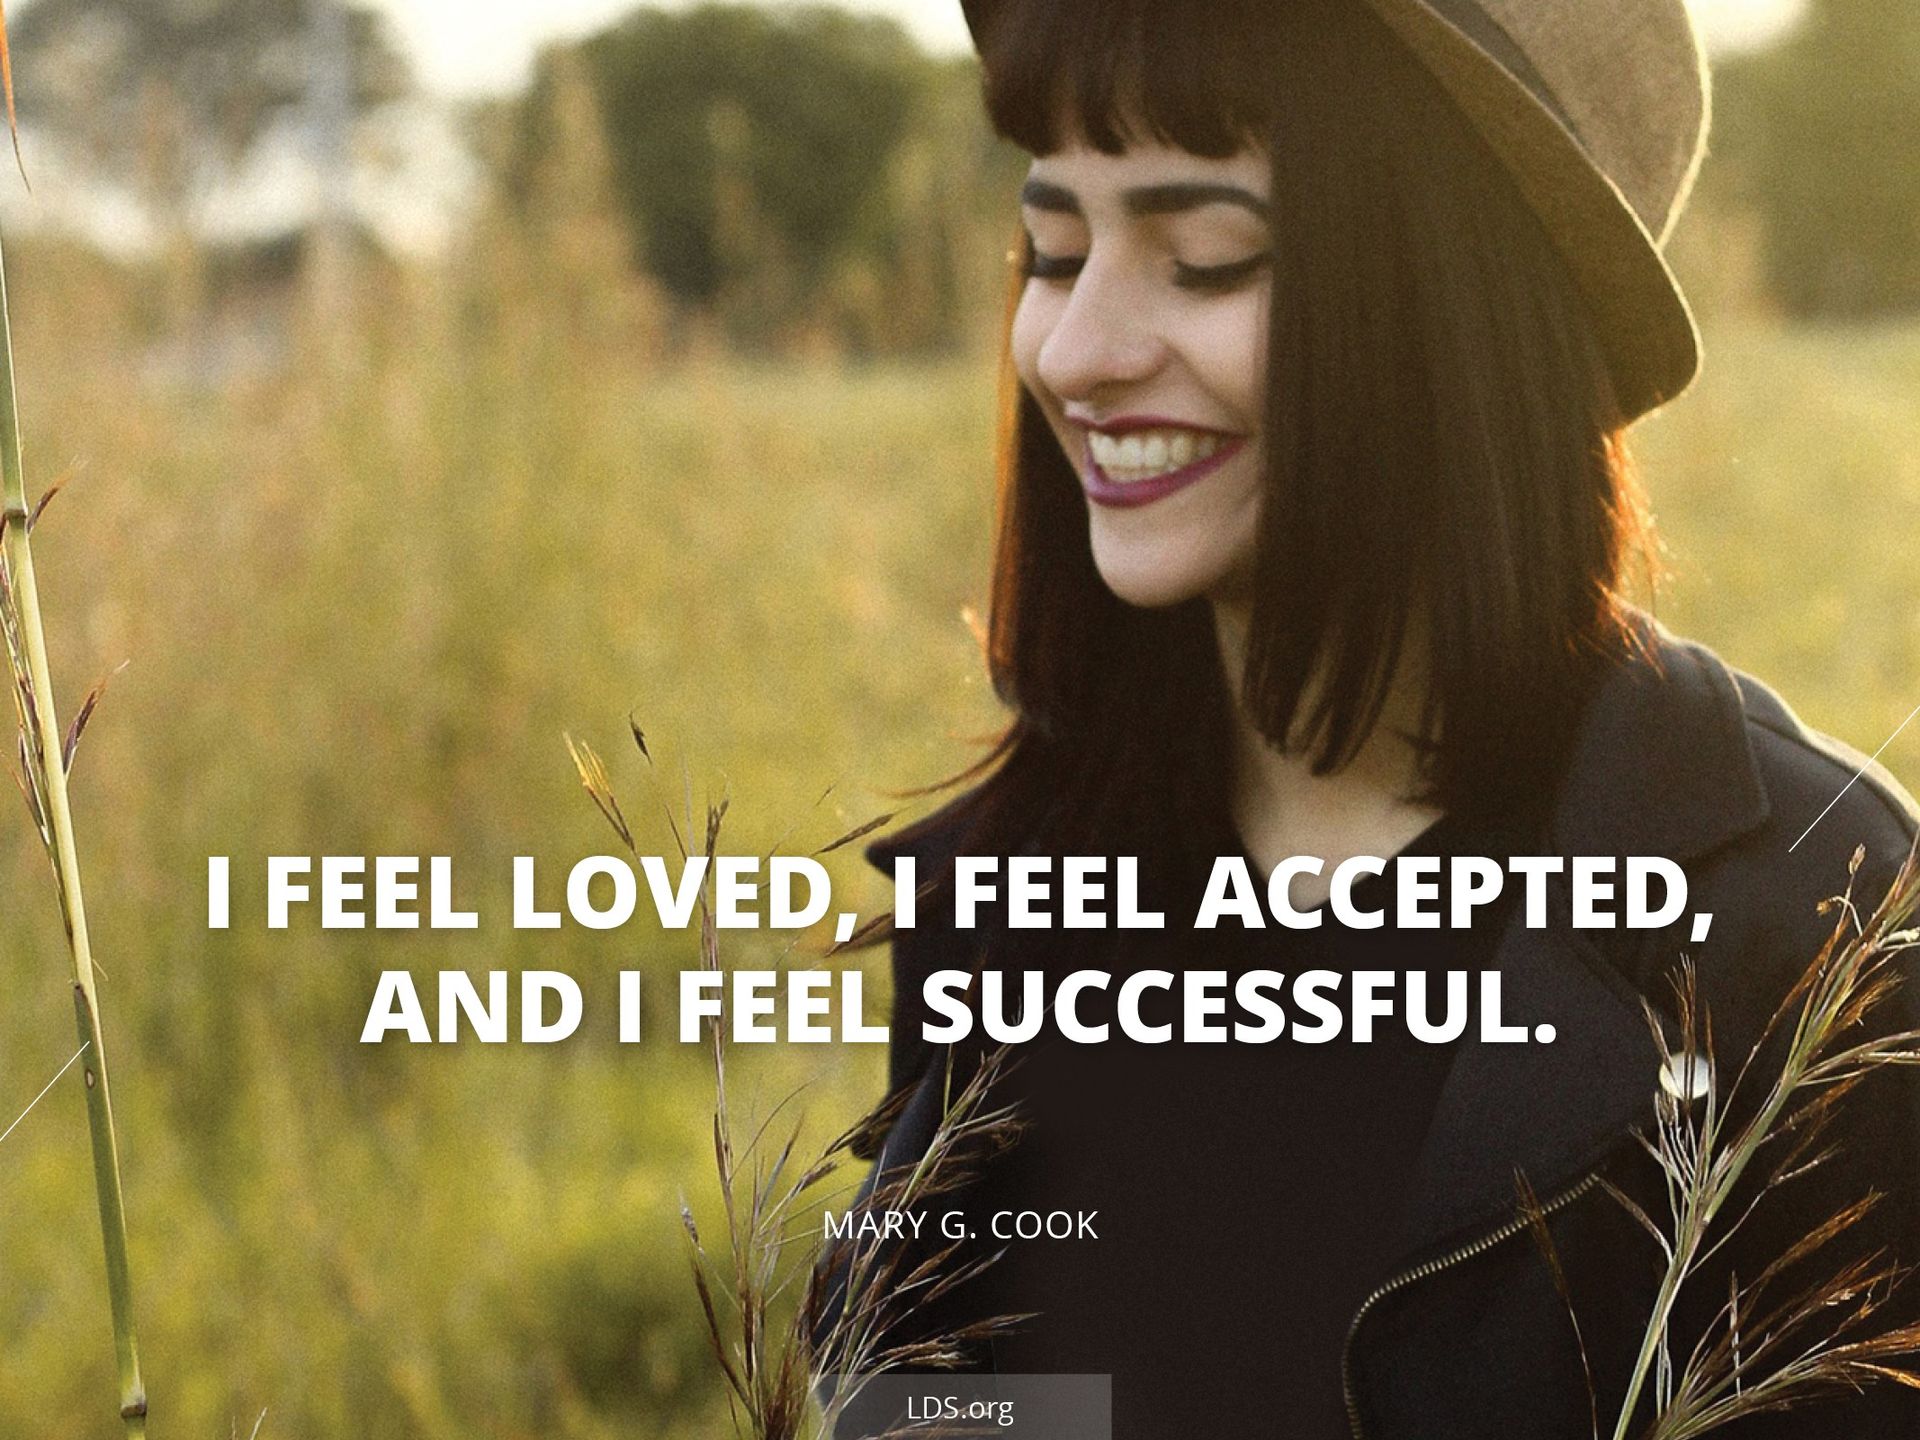 “I feel loved, I feel accepted, and I feel successful.”—Mary G. Cook, “Find Joy in Everyday Life”